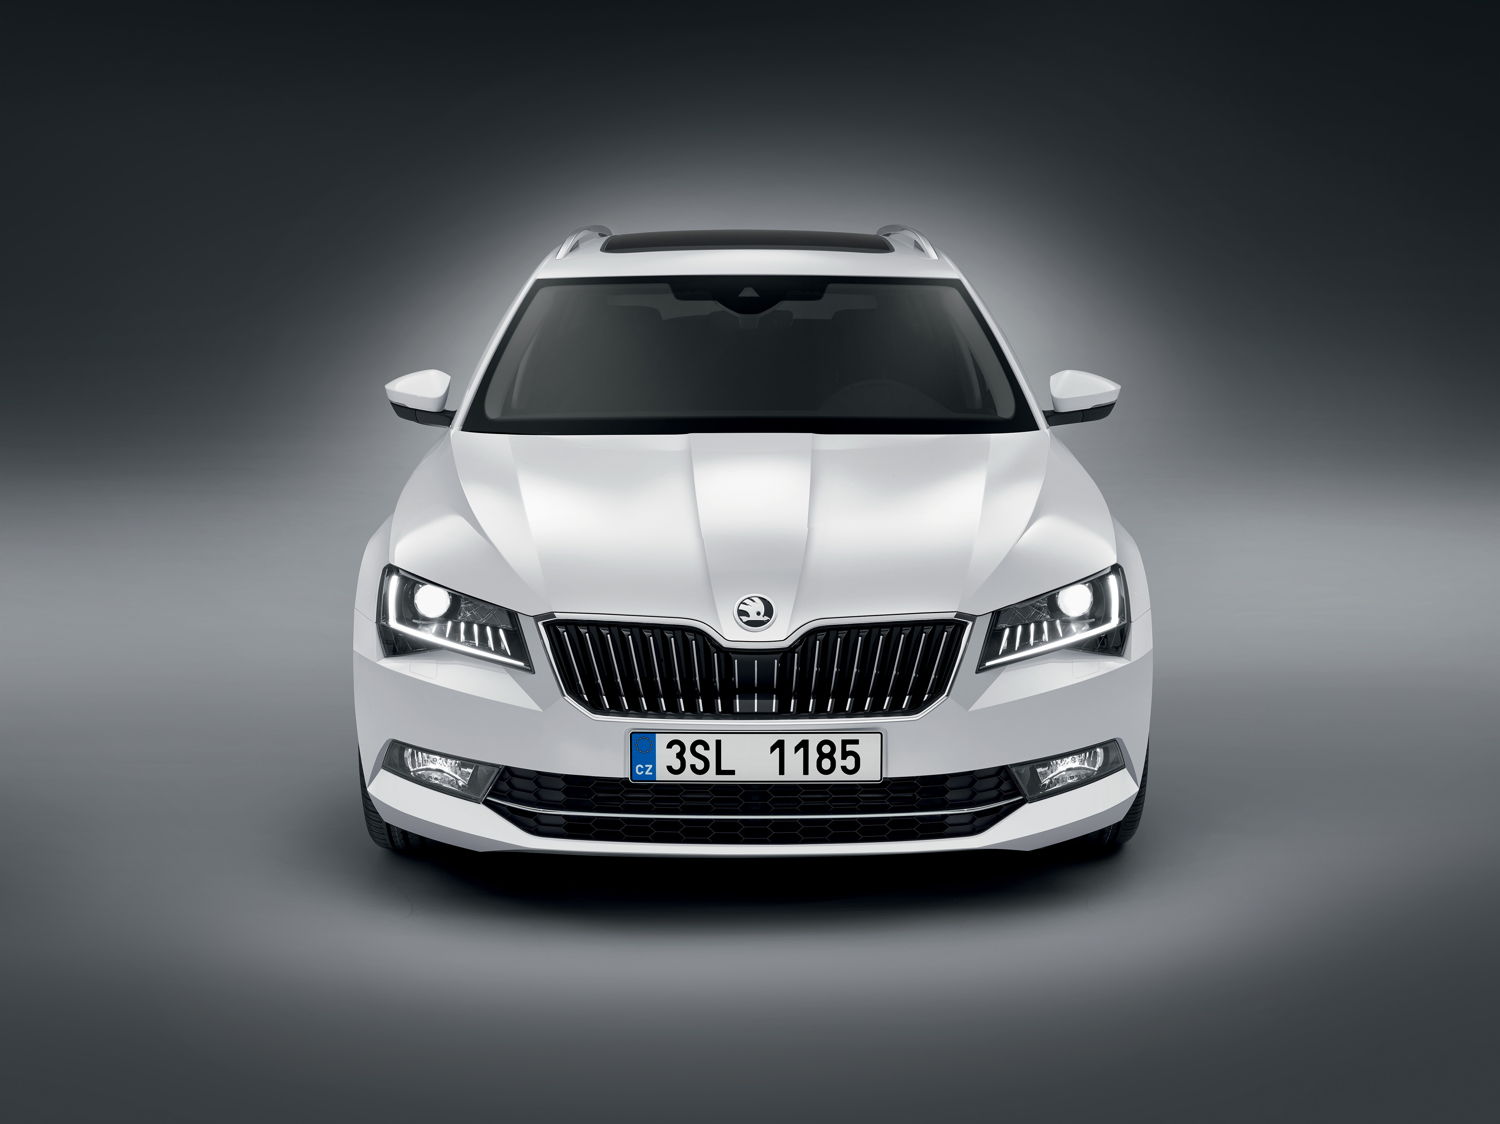 The lower, wider and significantly more three-dimensionally shaped radiator grille underlines the new confidence of the brand and model. The bonnet has a strong three-dimensional shape.